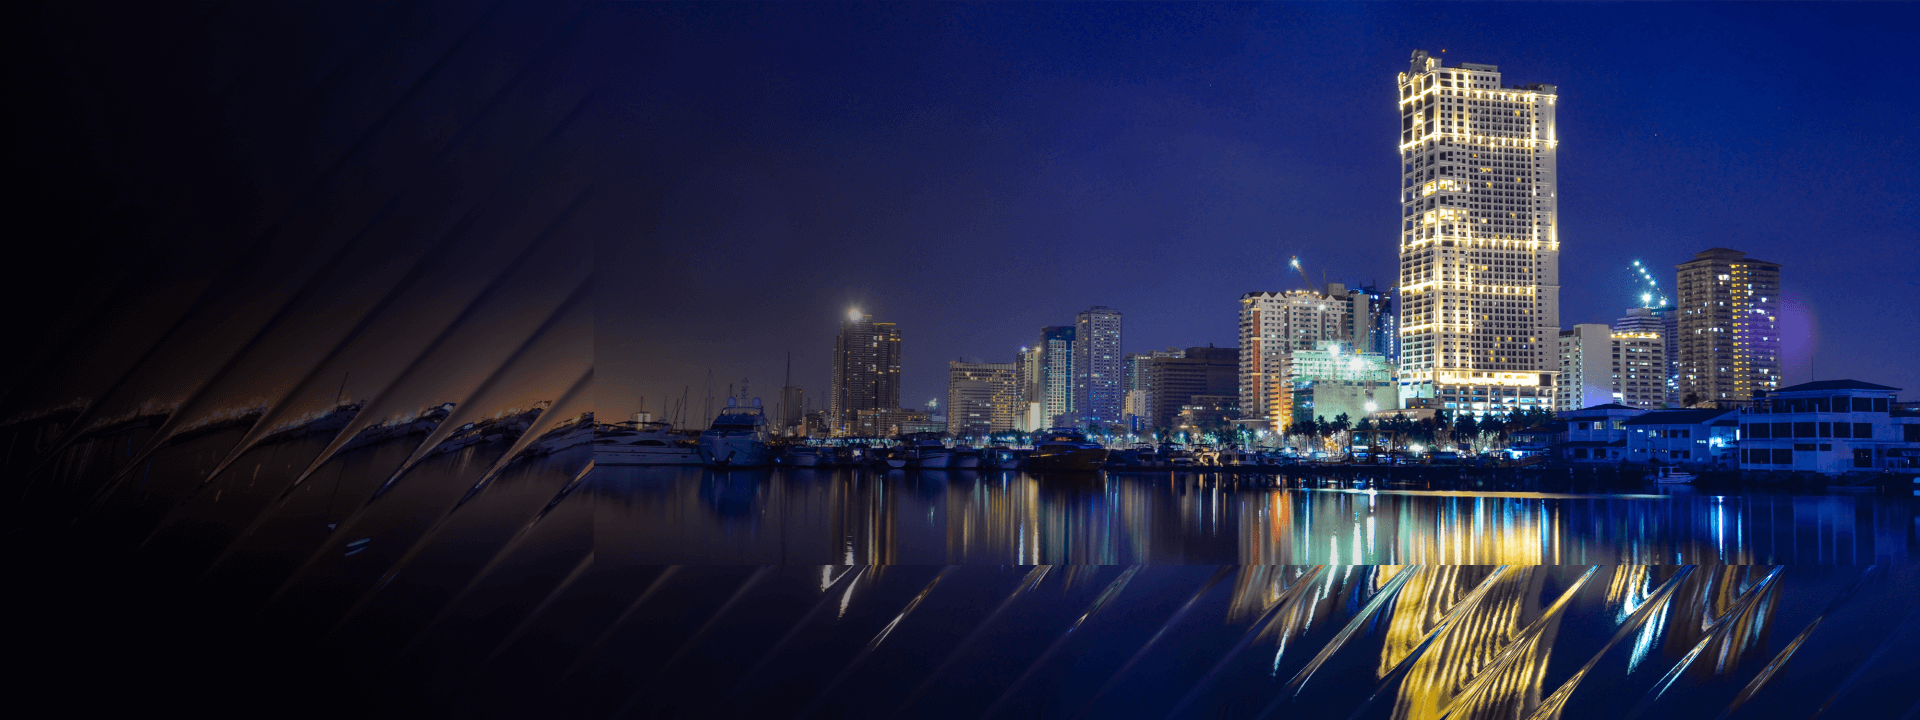 A photo of the Manila harbour at night